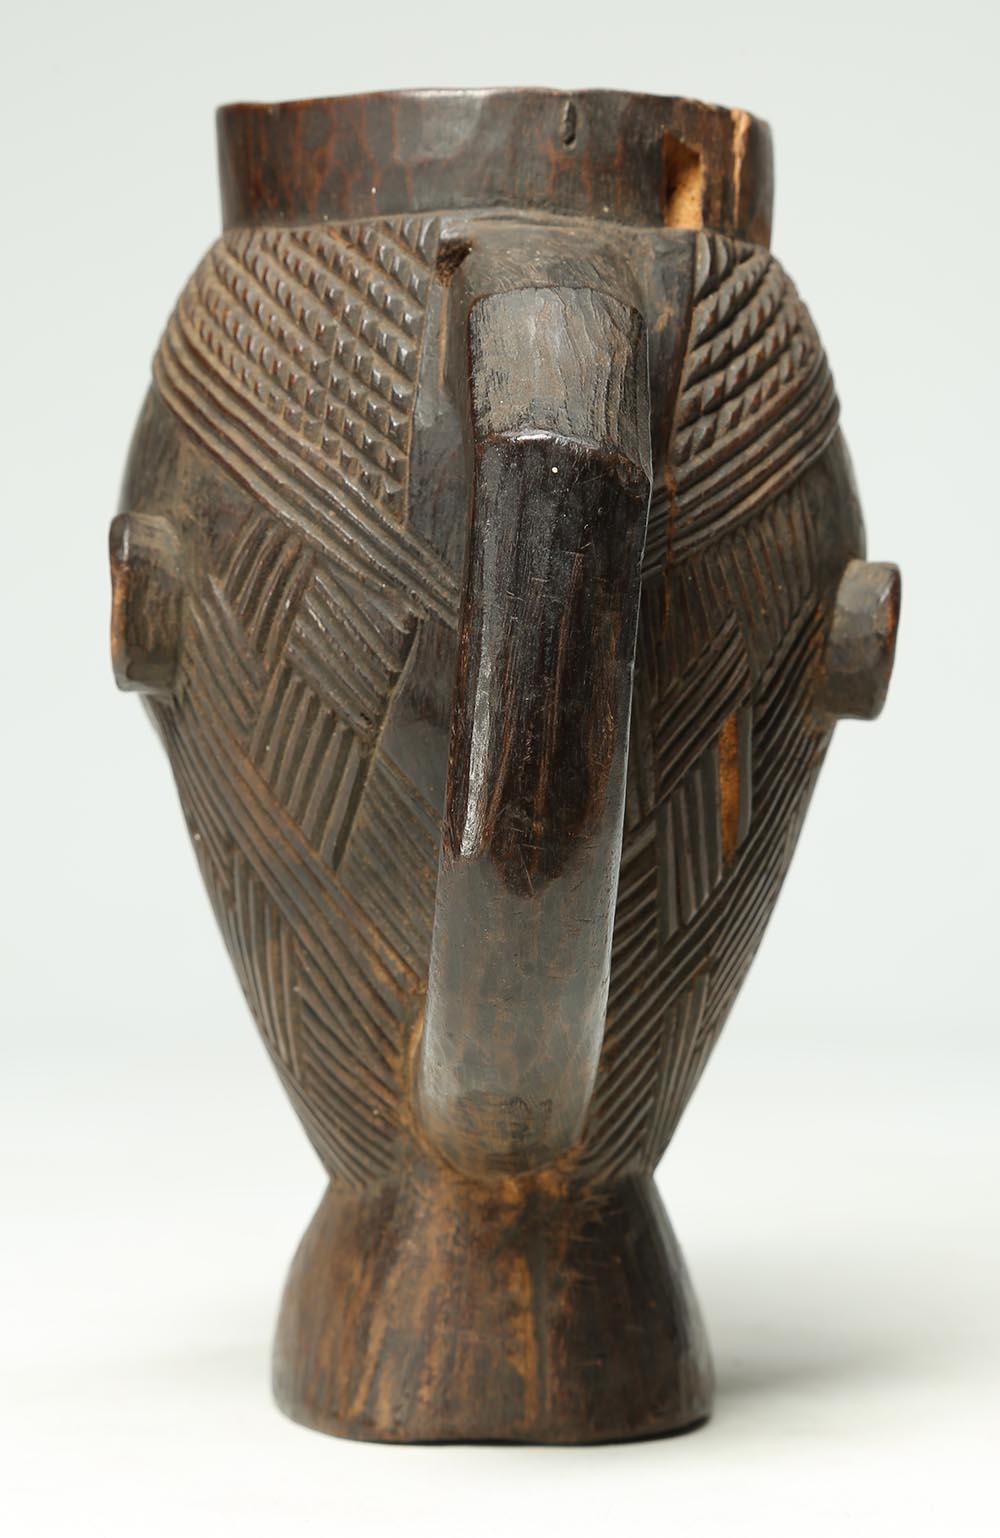 Fine Kuba Cup with Expressive Face on a Foot Early 20th Century African Art In Good Condition For Sale In Santa Fe, NM